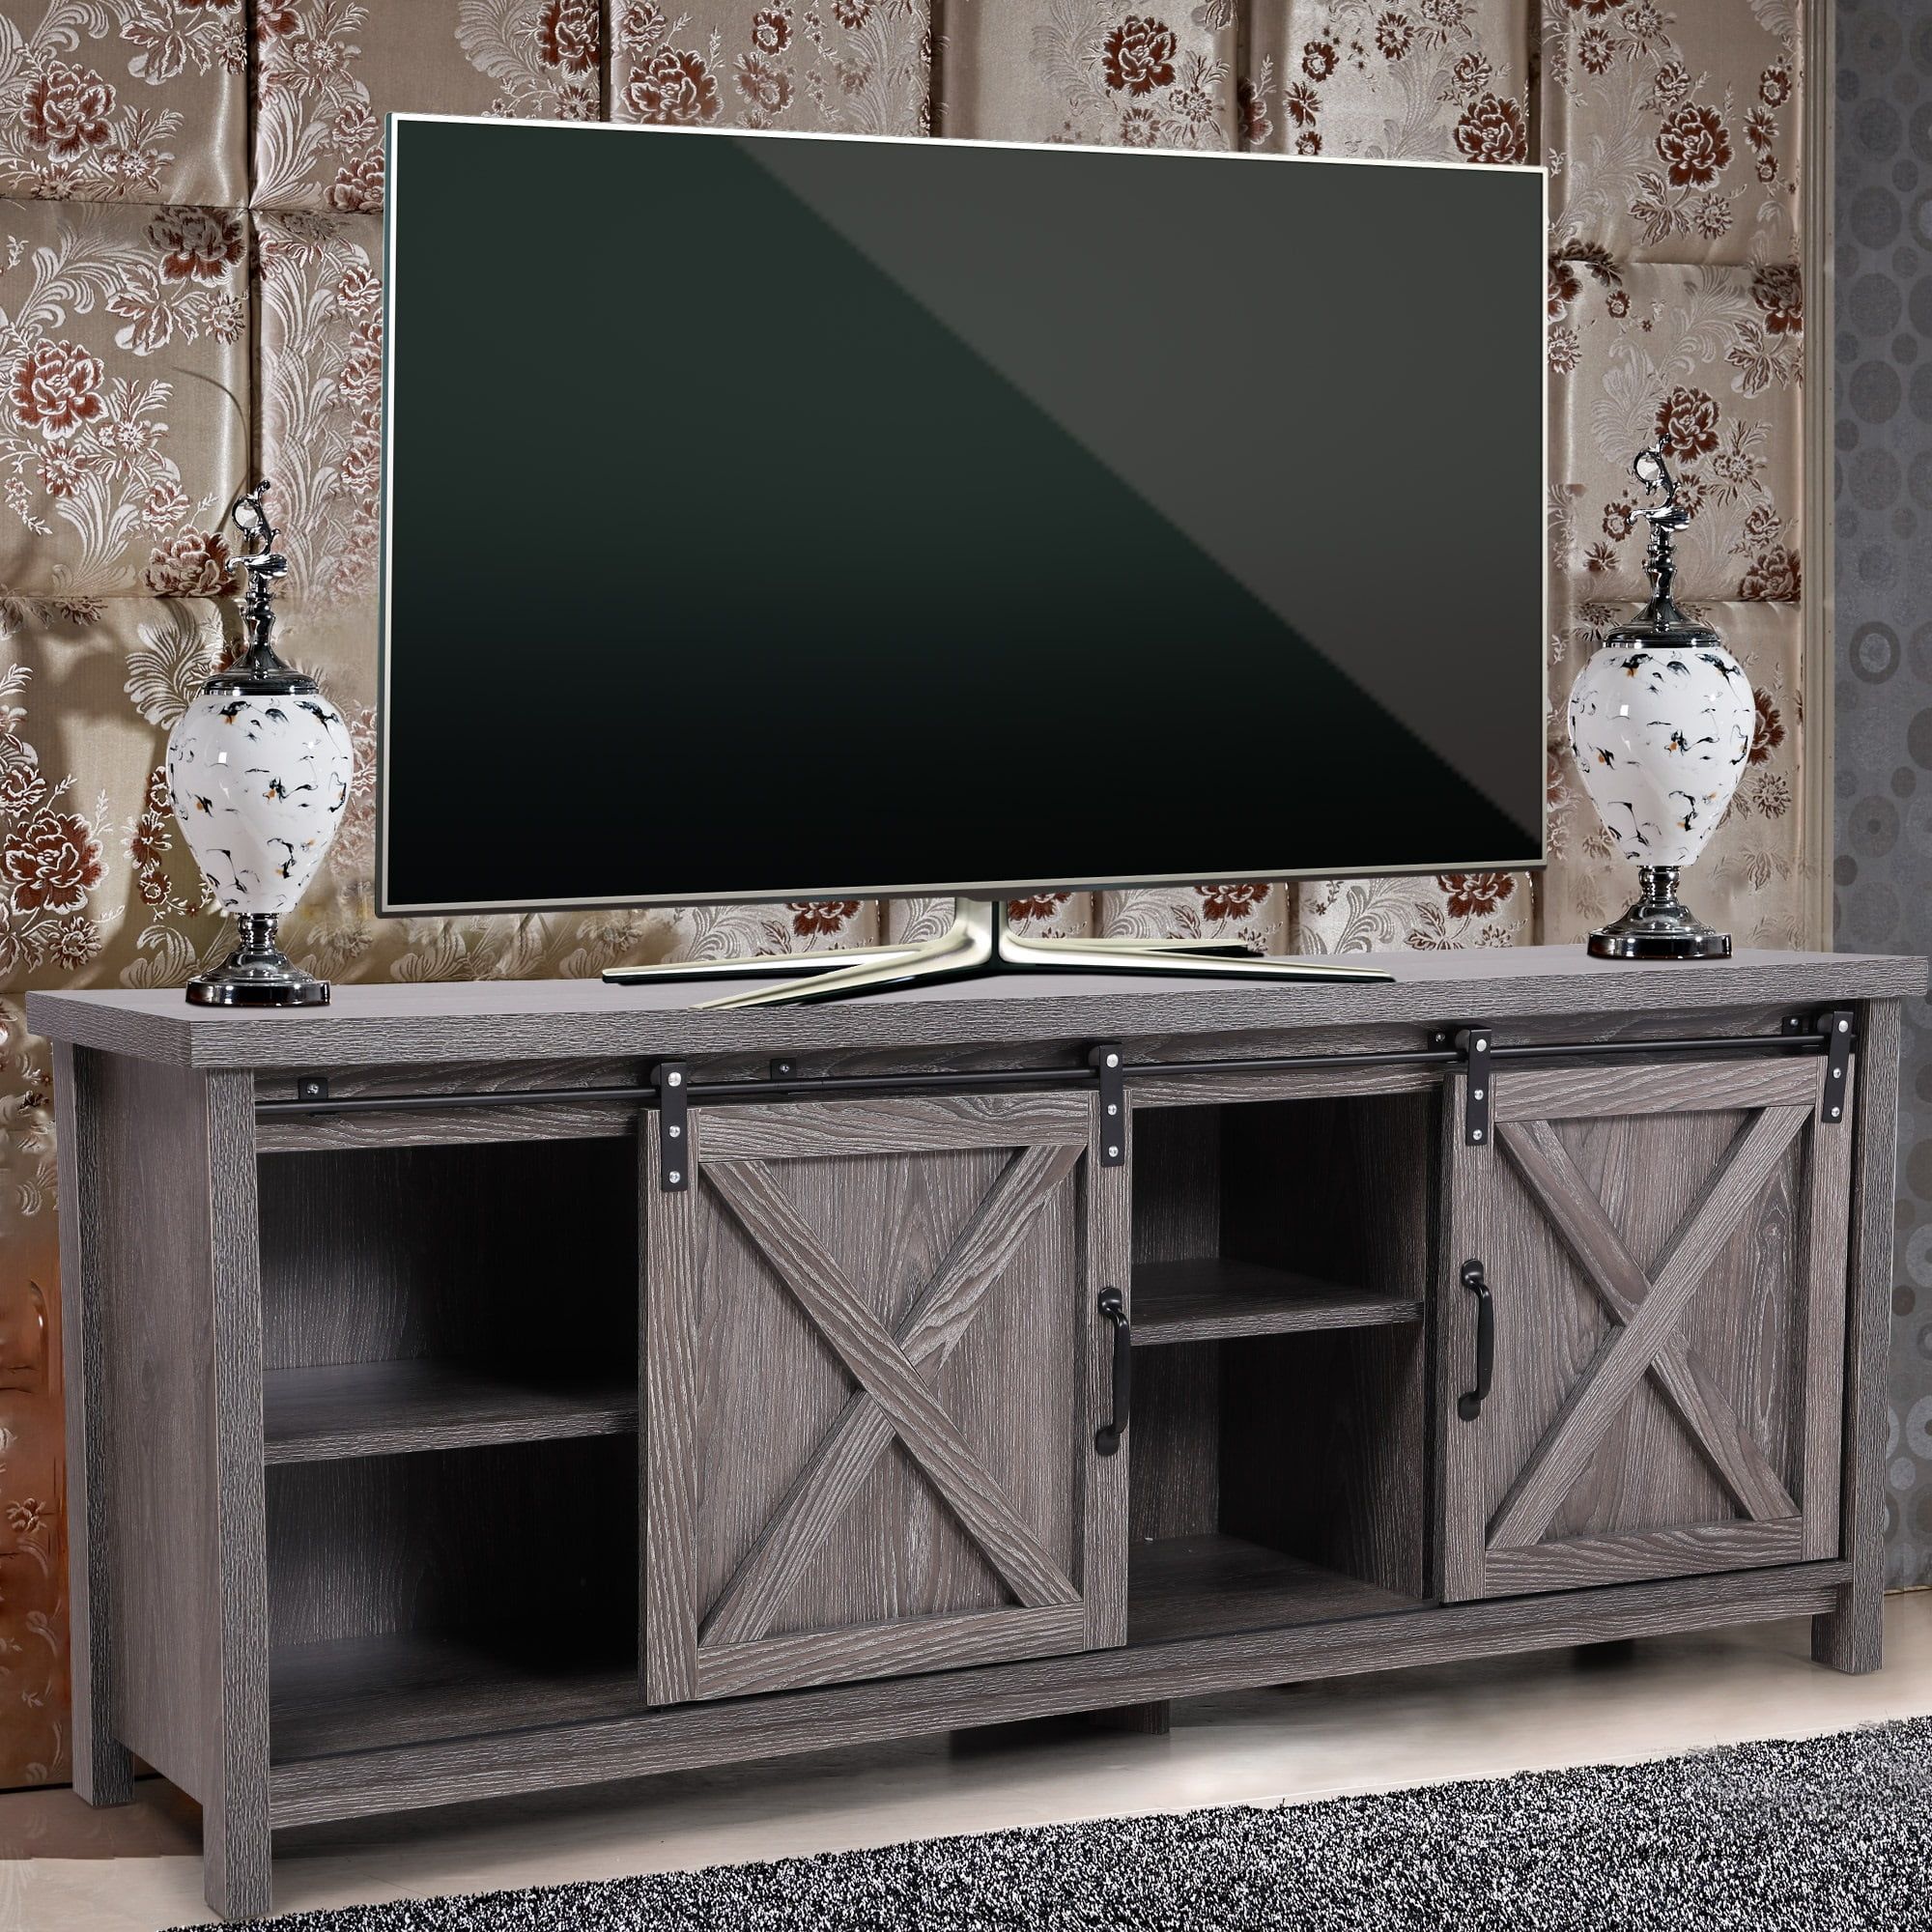 Jaxpety 58" Farmhouse Sliding Barn Door Tv Stand For Tvs Up To 65 Intended For Barn Door Media Tv Stands (Gallery 1 of 20)